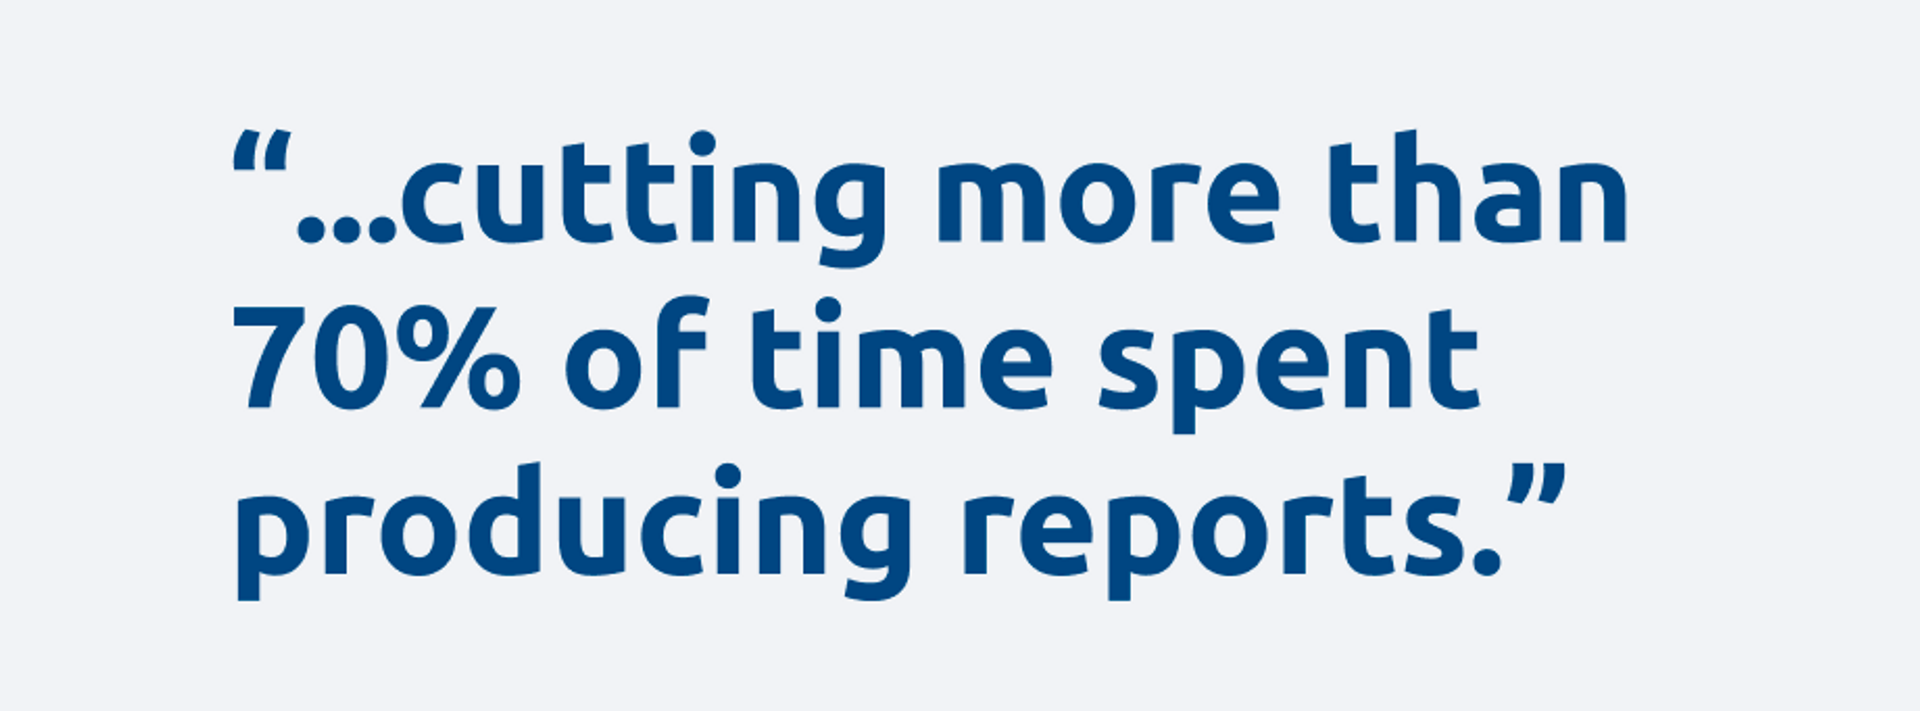 Quote "...cutting more than 70% of time spent on producing report"